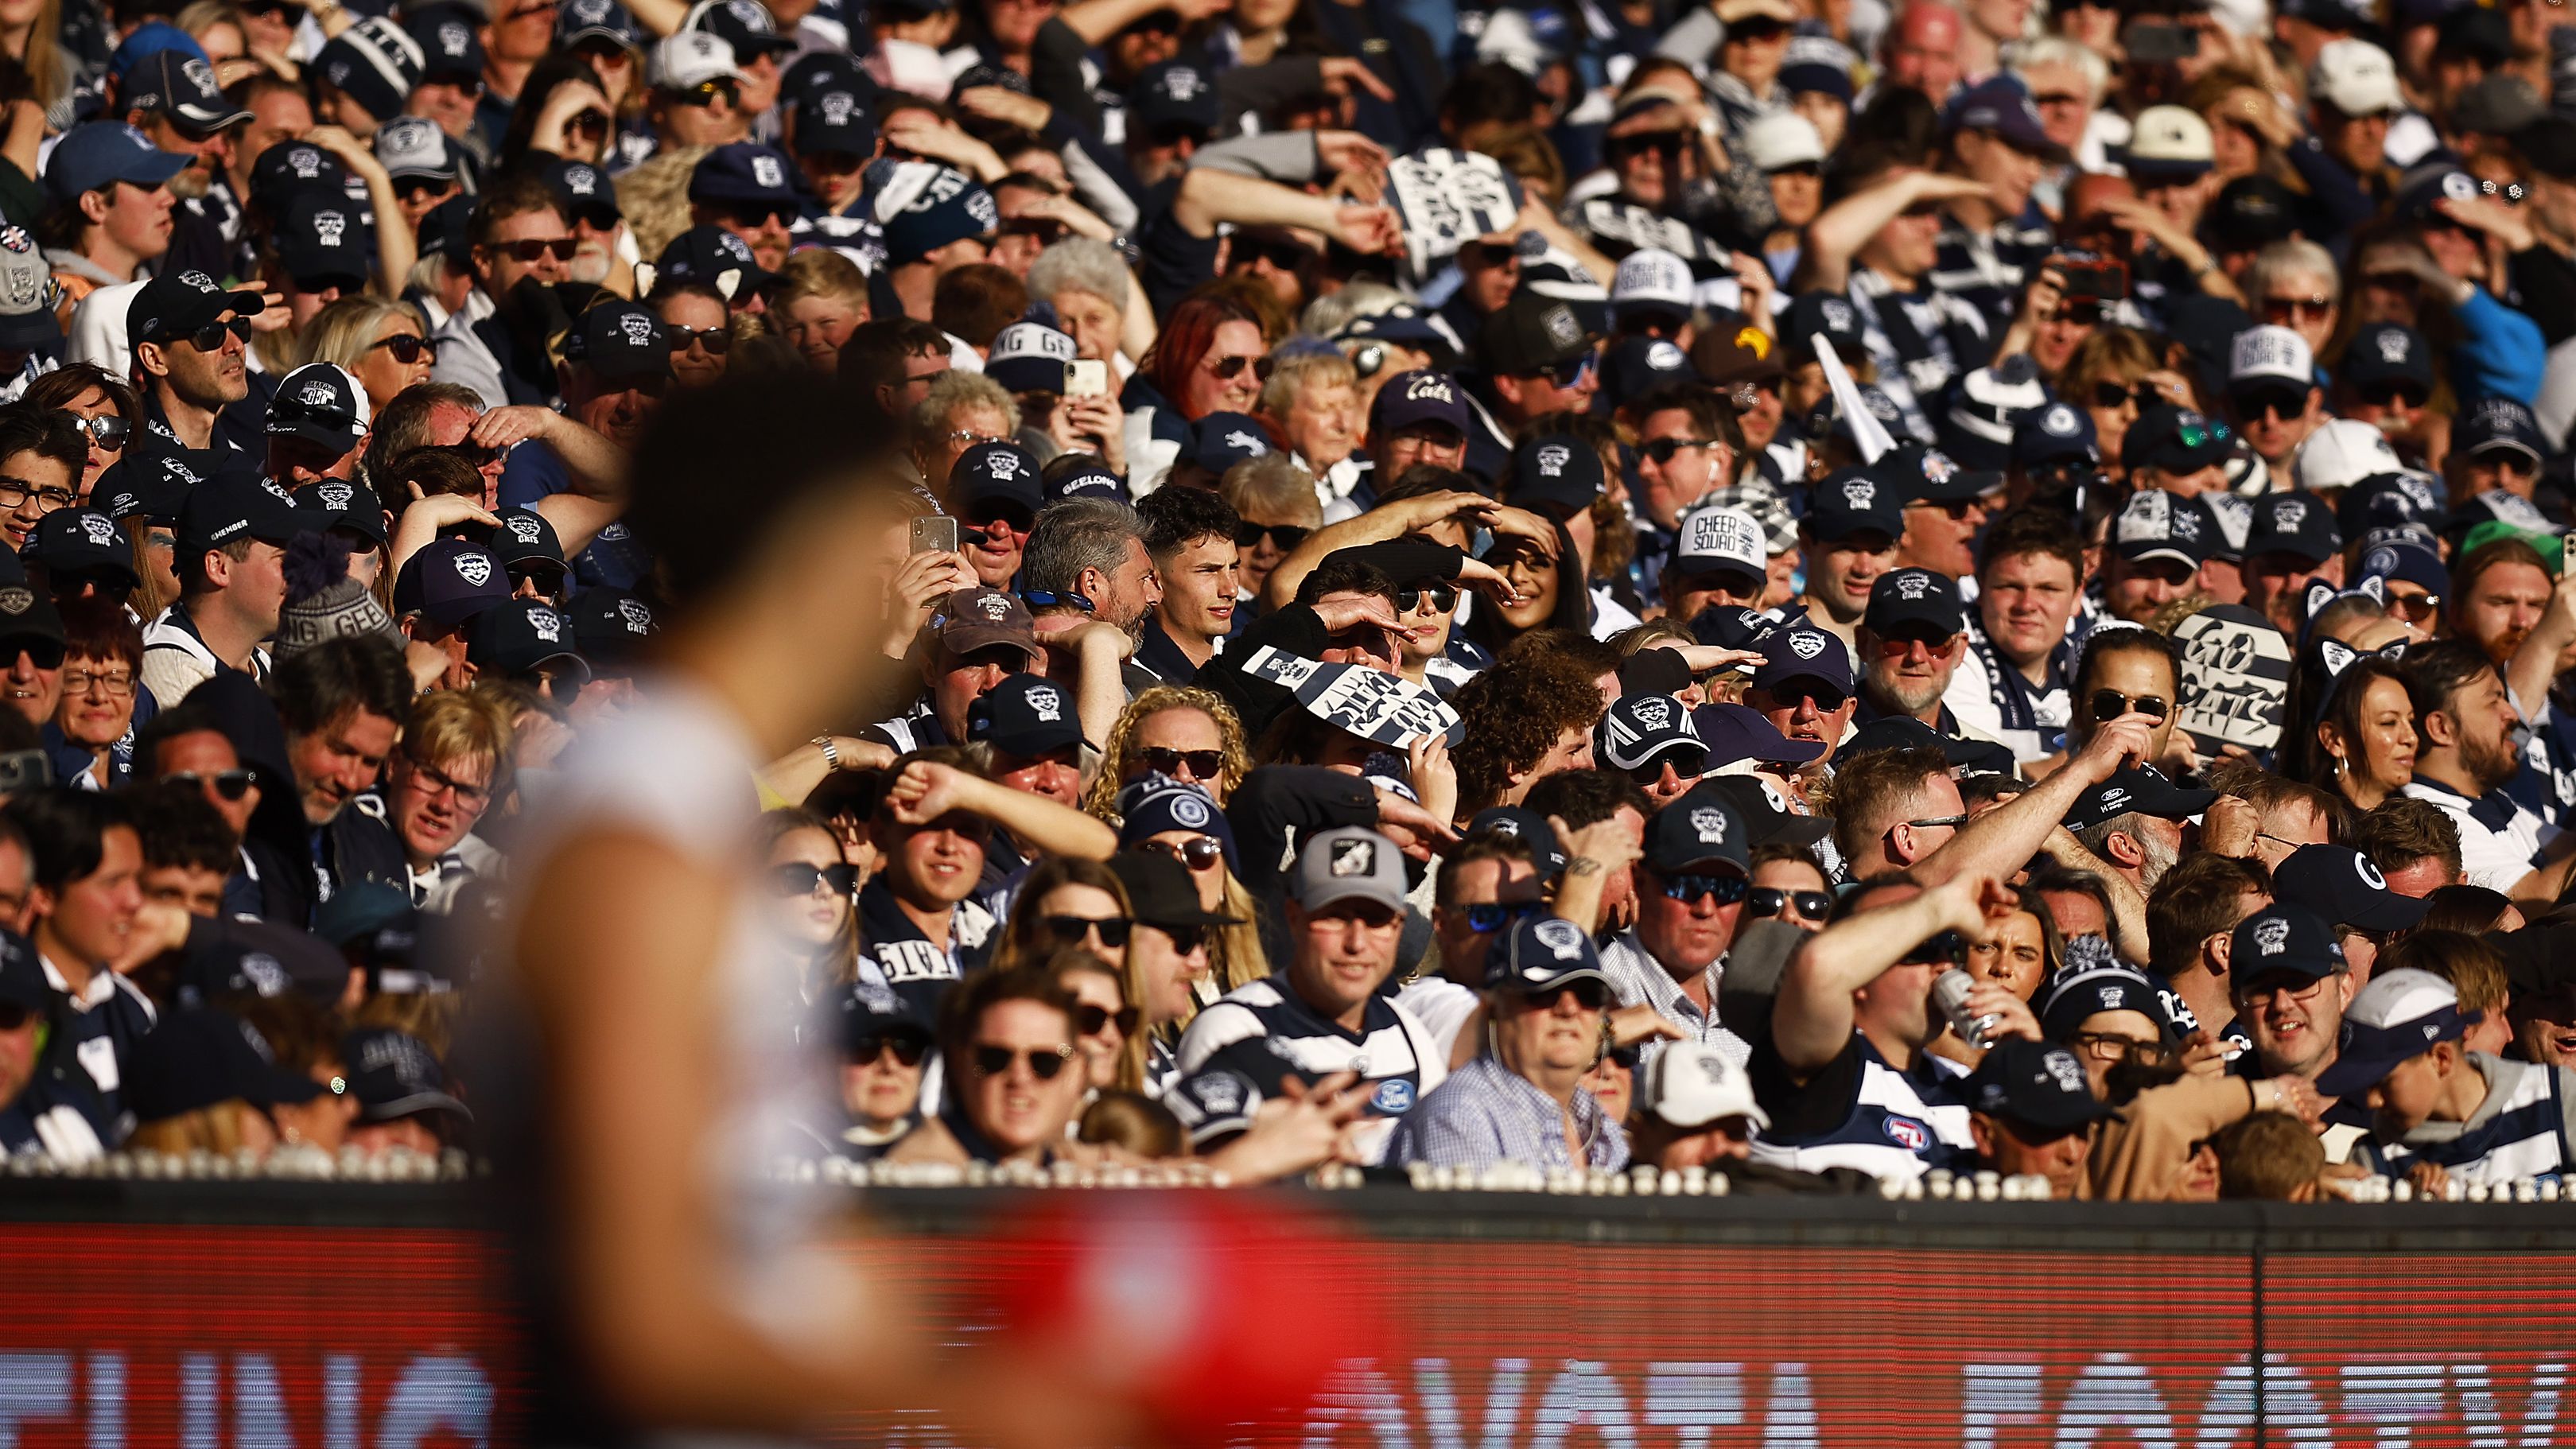 Cats fans look on as Tyson Stengle of the Cats lines up for goal during the 2022 AFL Grand Final match between the Geelong Cats and the Sydney Swans at the Melbourne Cricket Ground on September 24, 2022 in Melbourne, Australia. (Photo by Daniel Pockett/AFL Photos/via Getty Images)